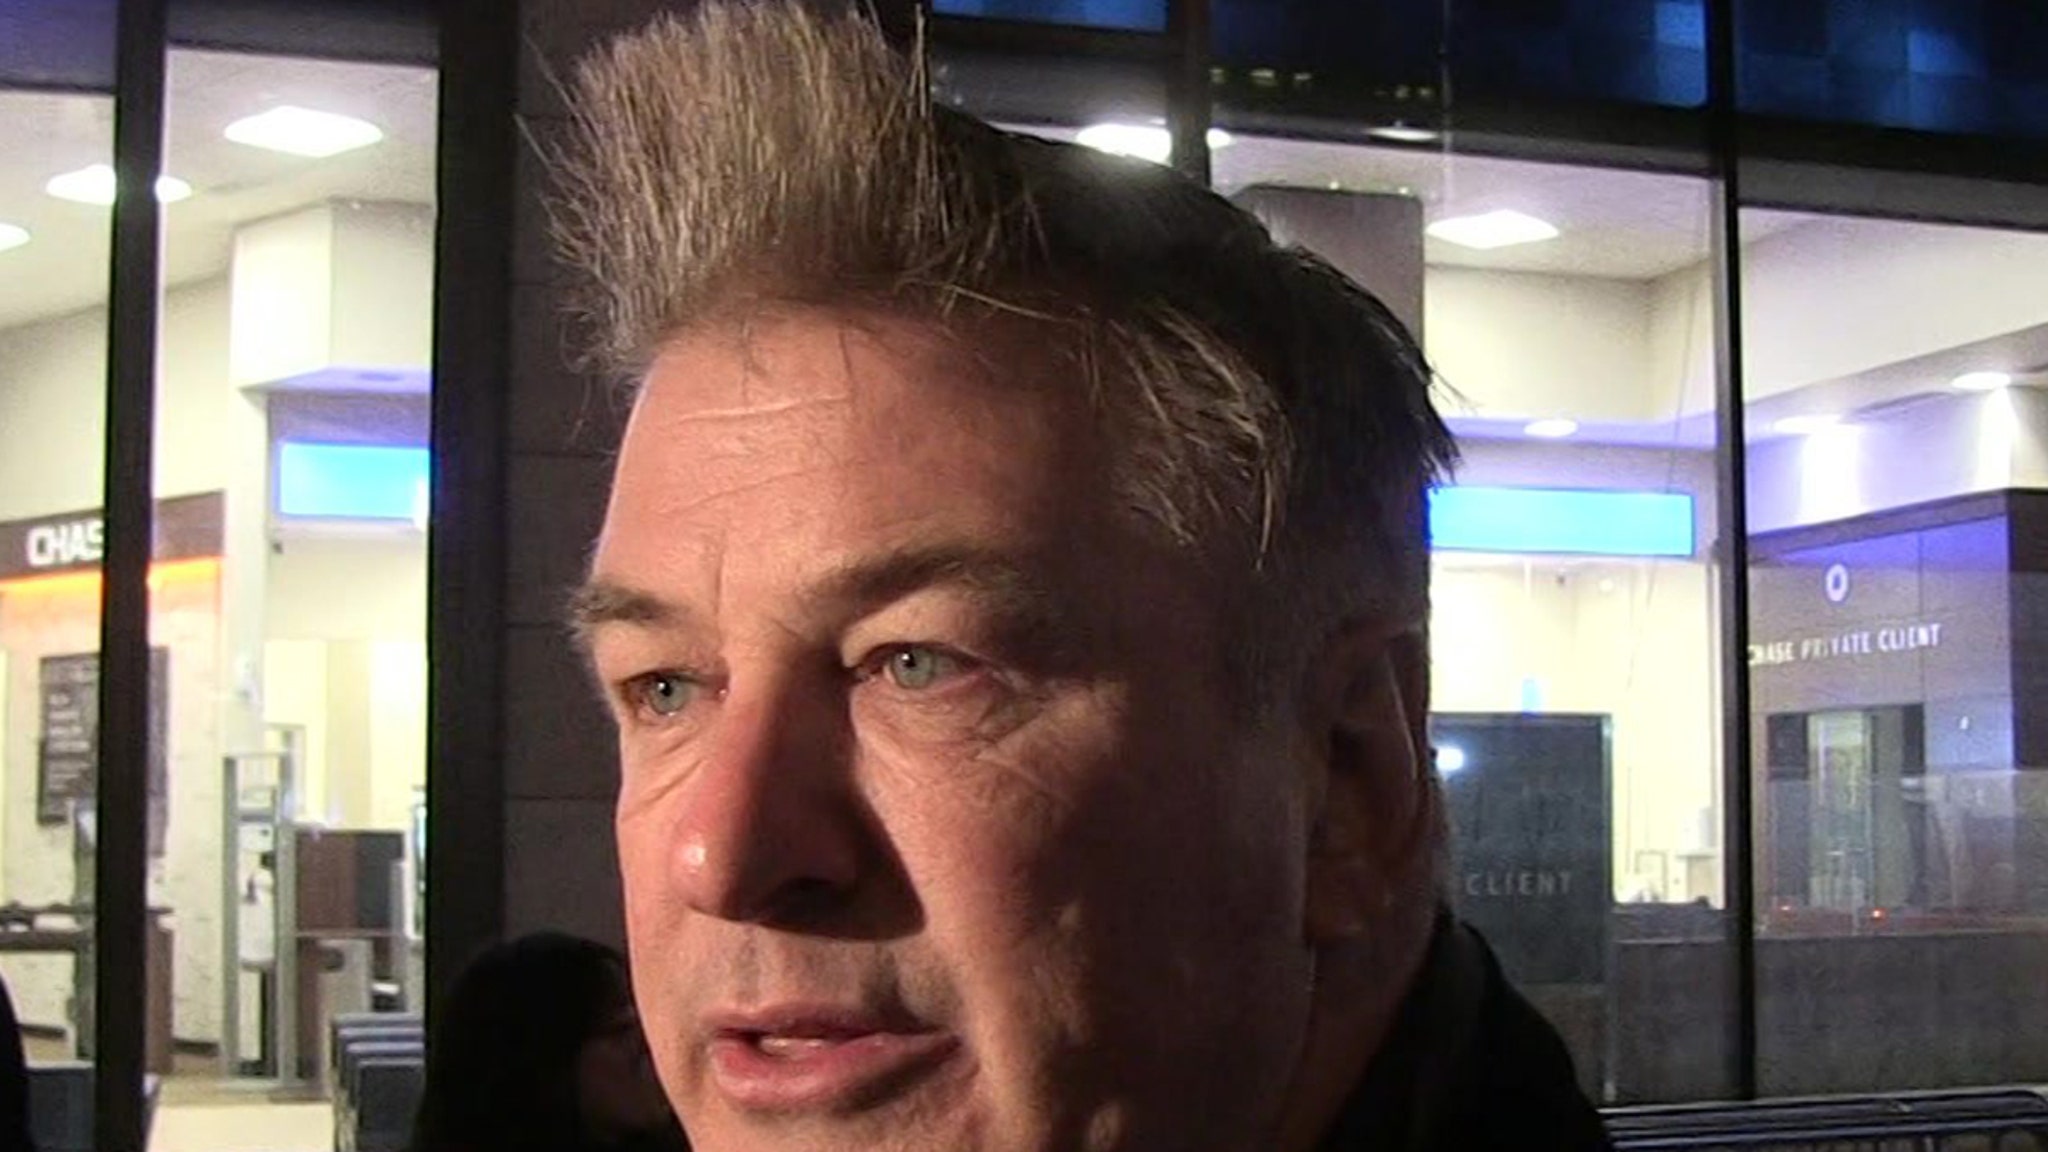 Alec Baldwin Accidental Shooting on Set, One Person Dead